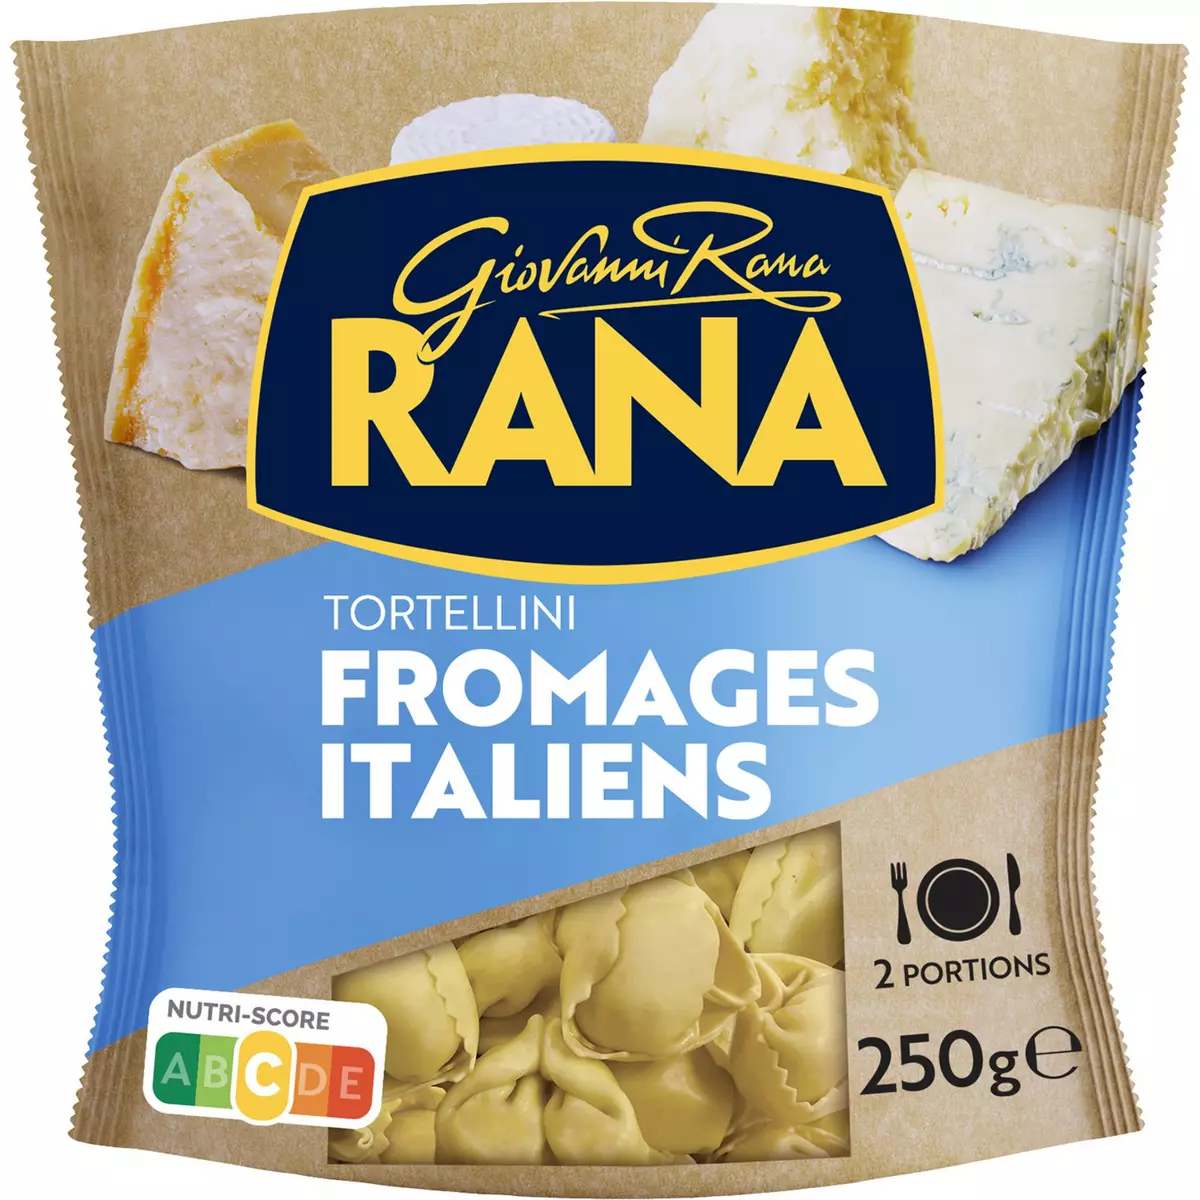 RANA Tortellini fromages italiens 2 portions 250g